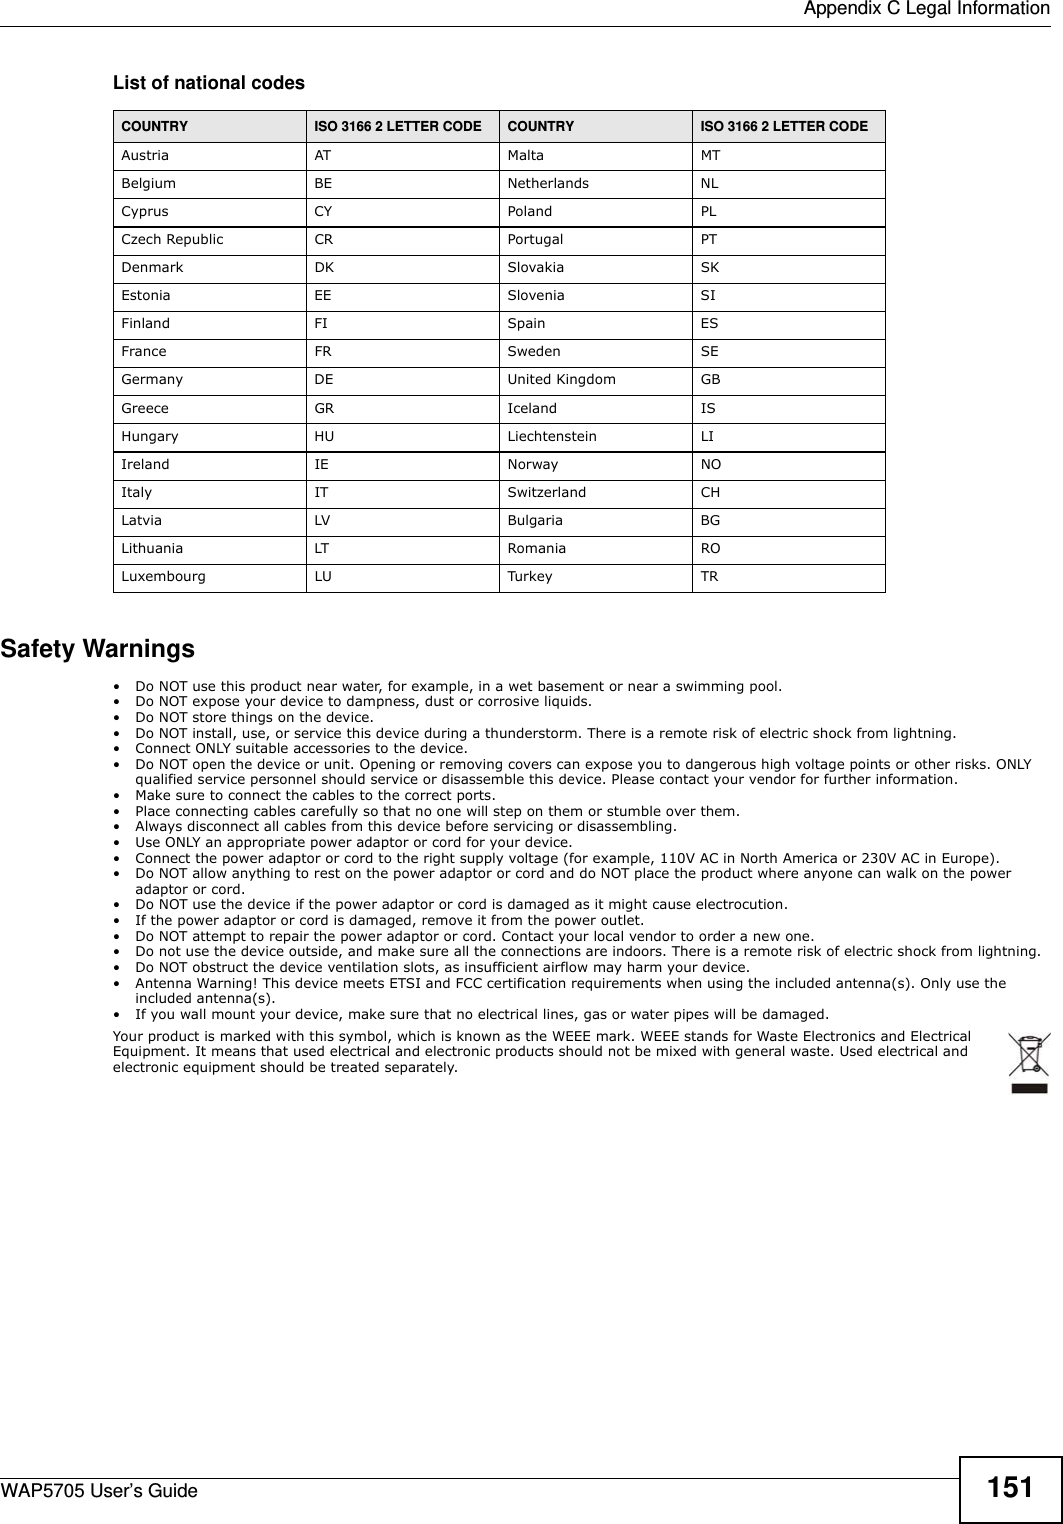  Appendix C Legal InformationWAP5705 User’s Guide 151List of national codesSafety Warnings• Do NOT use this product near water, for example, in a wet basement or near a swimming pool.• Do NOT expose your device to dampness, dust or corrosive liquids.• Do NOT store things on the device.• Do NOT install, use, or service this device during a thunderstorm. There is a remote risk of electric shock from lightning.• Connect ONLY suitable accessories to the device.• Do NOT open the device or unit. Opening or removing covers can expose you to dangerous high voltage points or other risks. ONLY qualified service personnel should service or disassemble this device. Please contact your vendor for further information.• Make sure to connect the cables to the correct ports.• Place connecting cables carefully so that no one will step on them or stumble over them.• Always disconnect all cables from this device before servicing or disassembling.• Use ONLY an appropriate power adaptor or cord for your device.• Connect the power adaptor or cord to the right supply voltage (for example, 110V AC in North America or 230V AC in Europe).• Do NOT allow anything to rest on the power adaptor or cord and do NOT place the product where anyone can walk on the power adaptor or cord.• Do NOT use the device if the power adaptor or cord is damaged as it might cause electrocution.• If the power adaptor or cord is damaged, remove it from the power outlet.• Do NOT attempt to repair the power adaptor or cord. Contact your local vendor to order a new one.• Do not use the device outside, and make sure all the connections are indoors. There is a remote risk of electric shock from lightning. • Do NOT obstruct the device ventilation slots, as insufficient airflow may harm your device. • Antenna Warning! This device meets ETSI and FCC certification requirements when using the included antenna(s). Only use the included antenna(s). • If you wall mount your device, make sure that no electrical lines, gas or water pipes will be damaged.Your product is marked with this symbol, which is known as the WEEE mark. WEEE stands for Waste Electronics and Electrical Equipment. It means that used electrical and electronic products should not be mixed with general waste. Used electrical and electronic equipment should be treated separately. COUNTRY ISO 3166 2 LETTER CODE COUNTRY ISO 3166 2 LETTER CODEAustria AT Malta MTBelgium BE Netherlands NLCyprus CY Poland PLCzech Republic CR Portugal PTDenmark DK Slovakia SKEstonia EE Slovenia SIFinland FI Spain ESFrance FR Sweden SEGermany DE United Kingdom GBGreece GR Iceland ISHungary HU Liechtenstein LIIreland IE Norway NOItaly IT Switzerland CHLatvia LV Bulgaria BGLithuania LT Romania ROLuxembourg LU Turkey TR